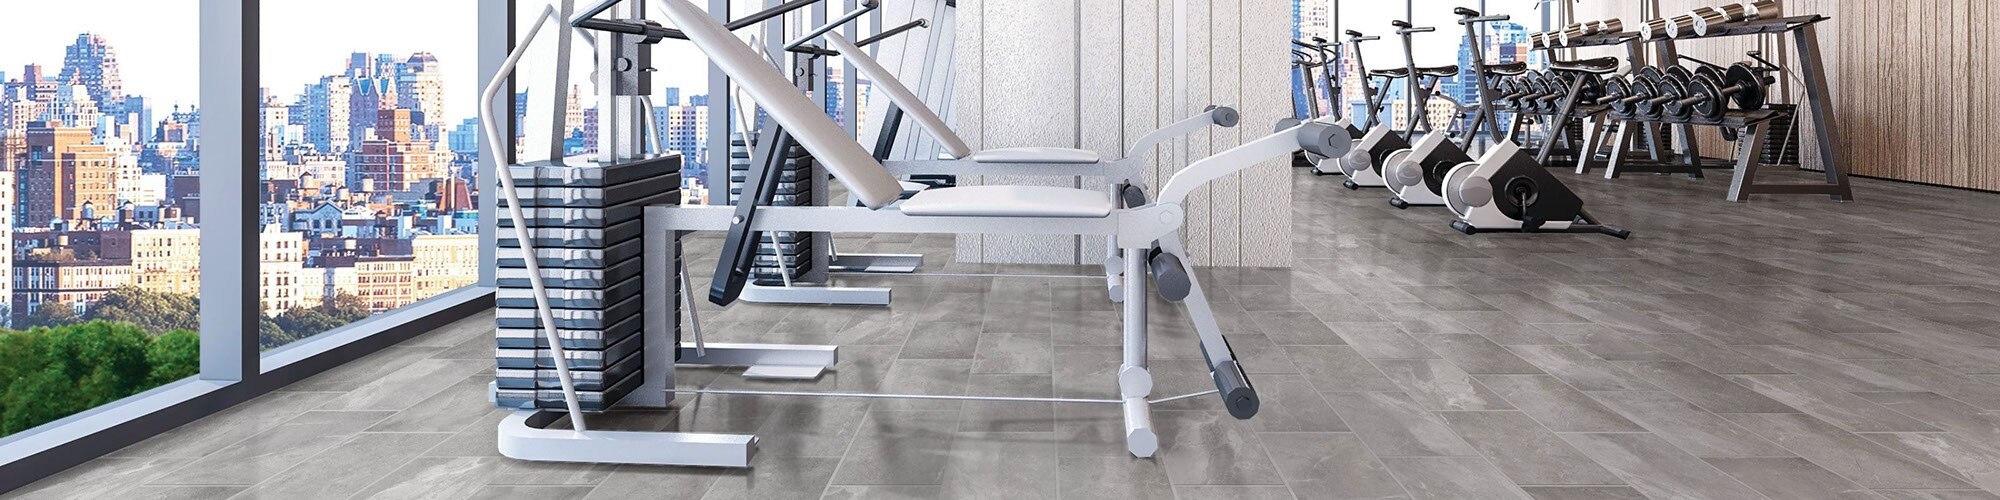 Highrise gym with weight machines, free weights on racks, 12x24 gray marble look floor tile, and windows with view of city skyline.